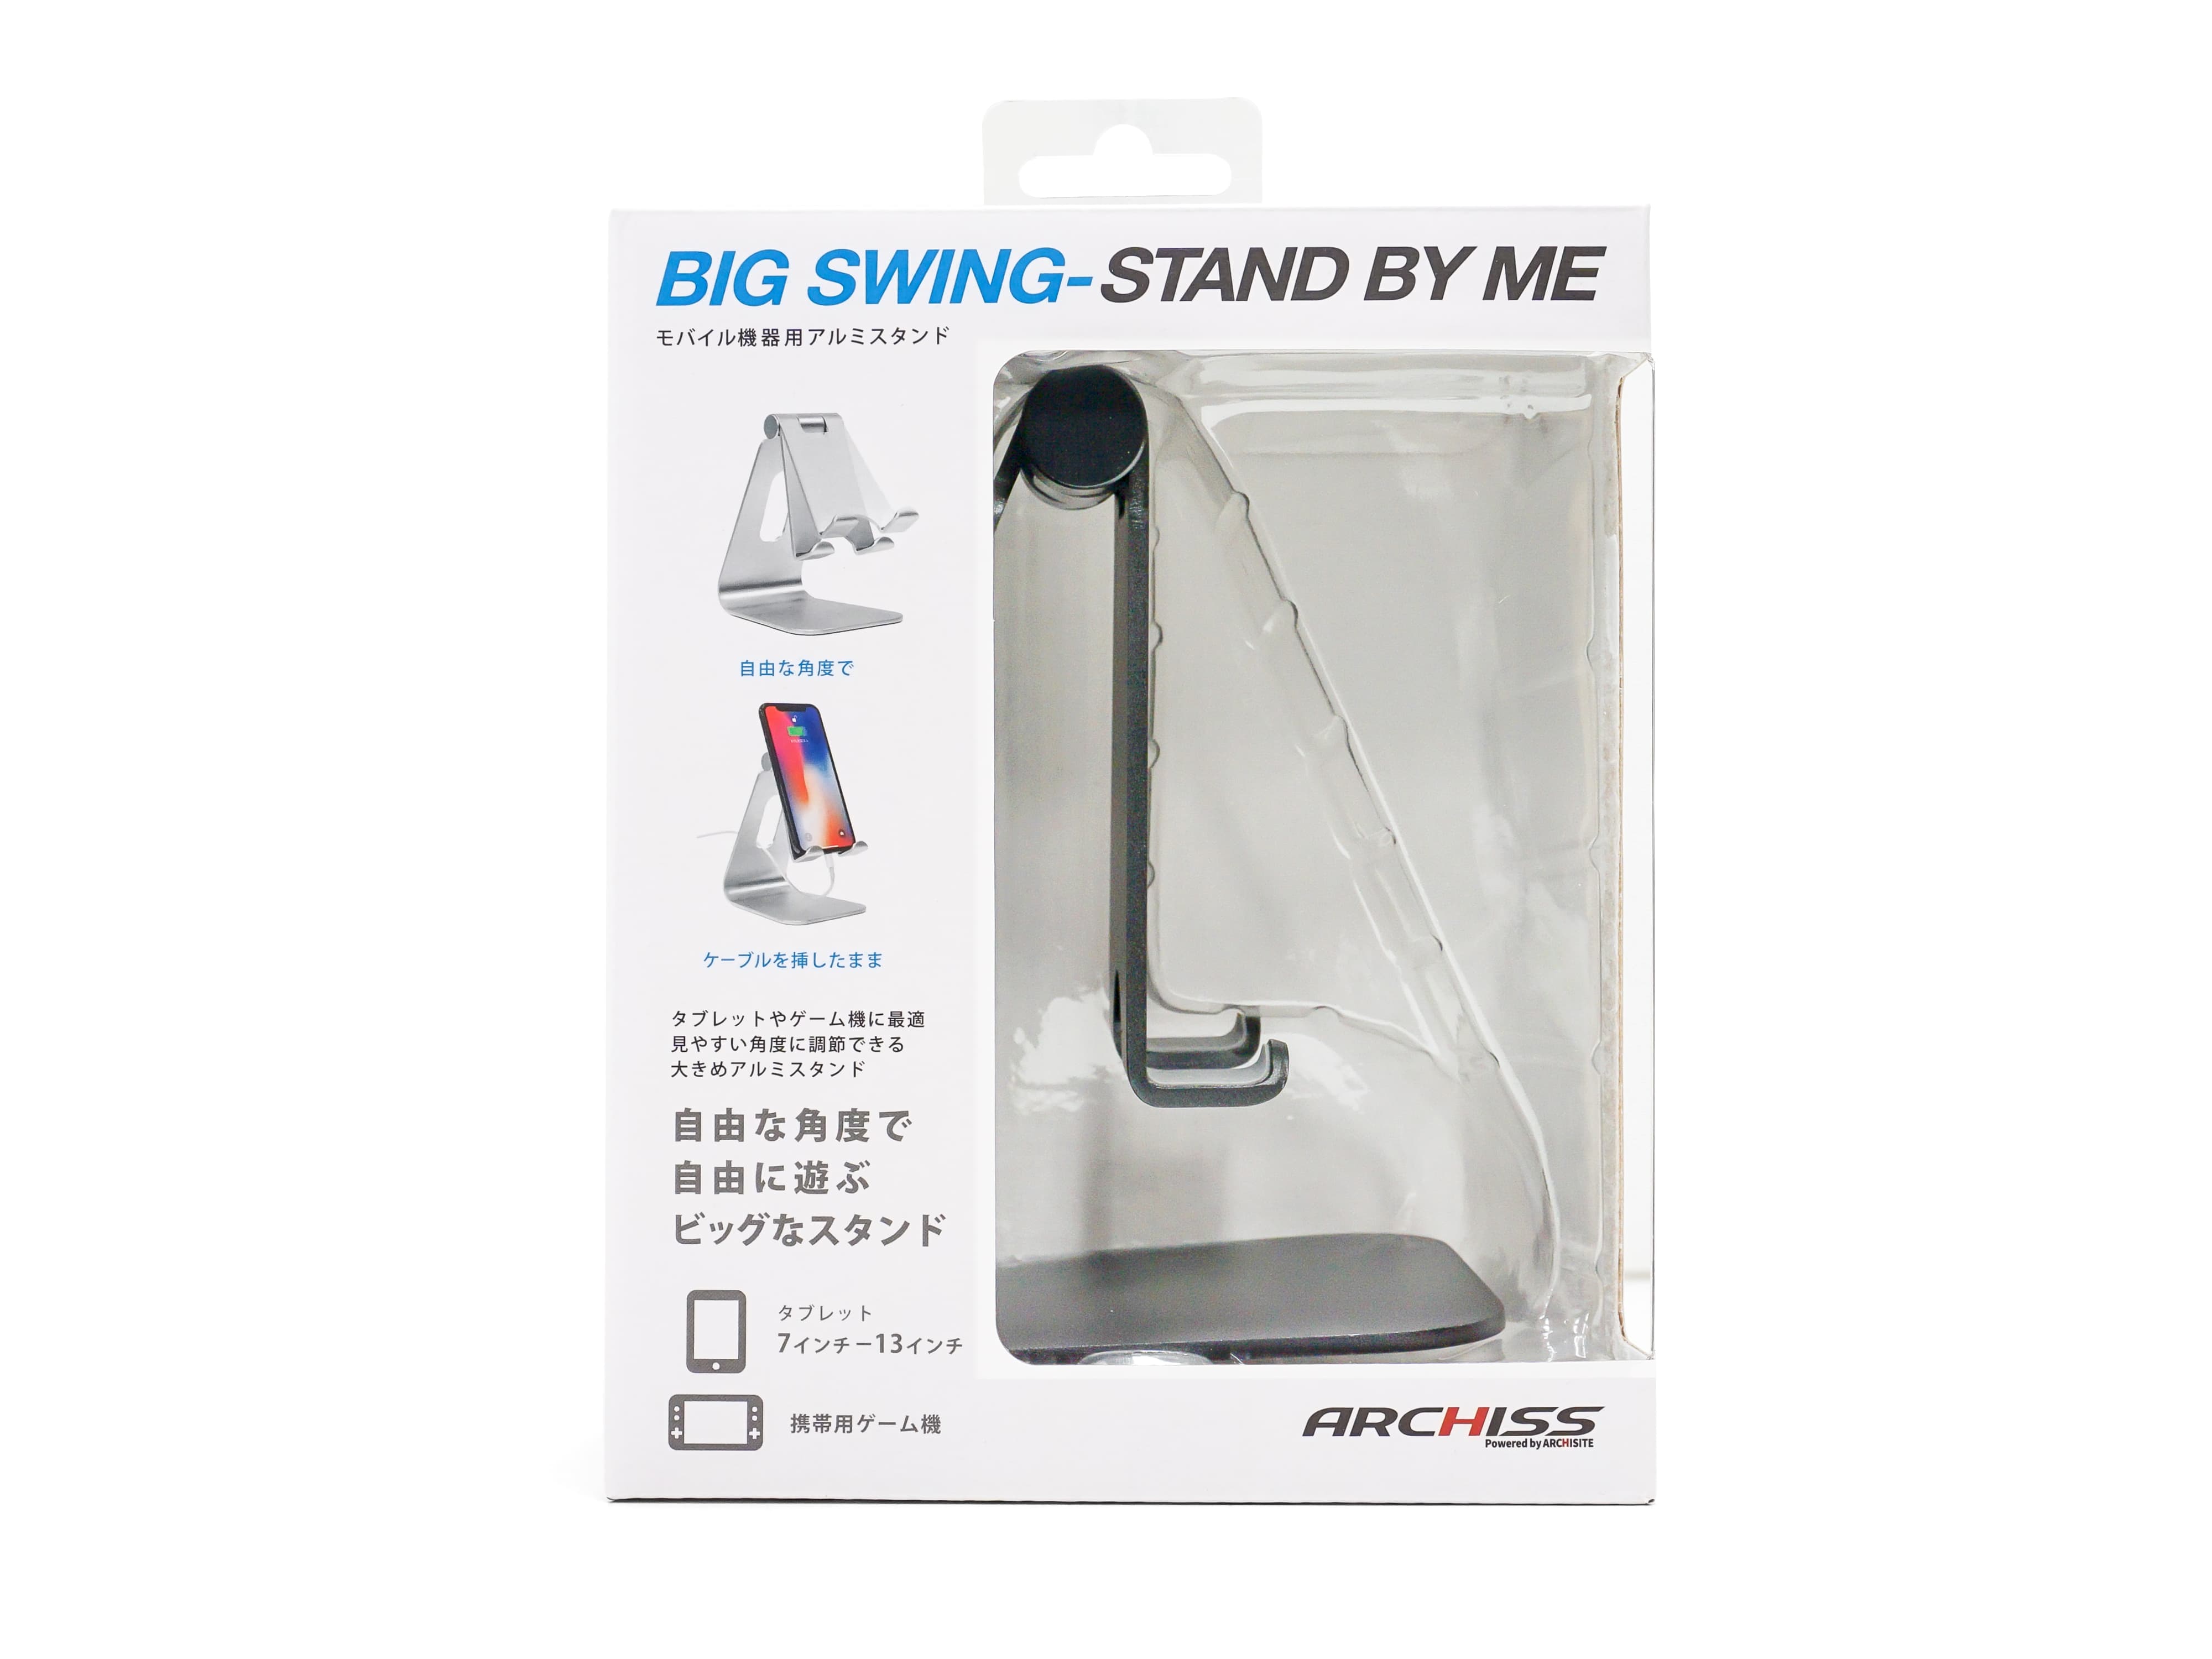 BIG SWING-STAND BY ME - 株式会社アーキサイト